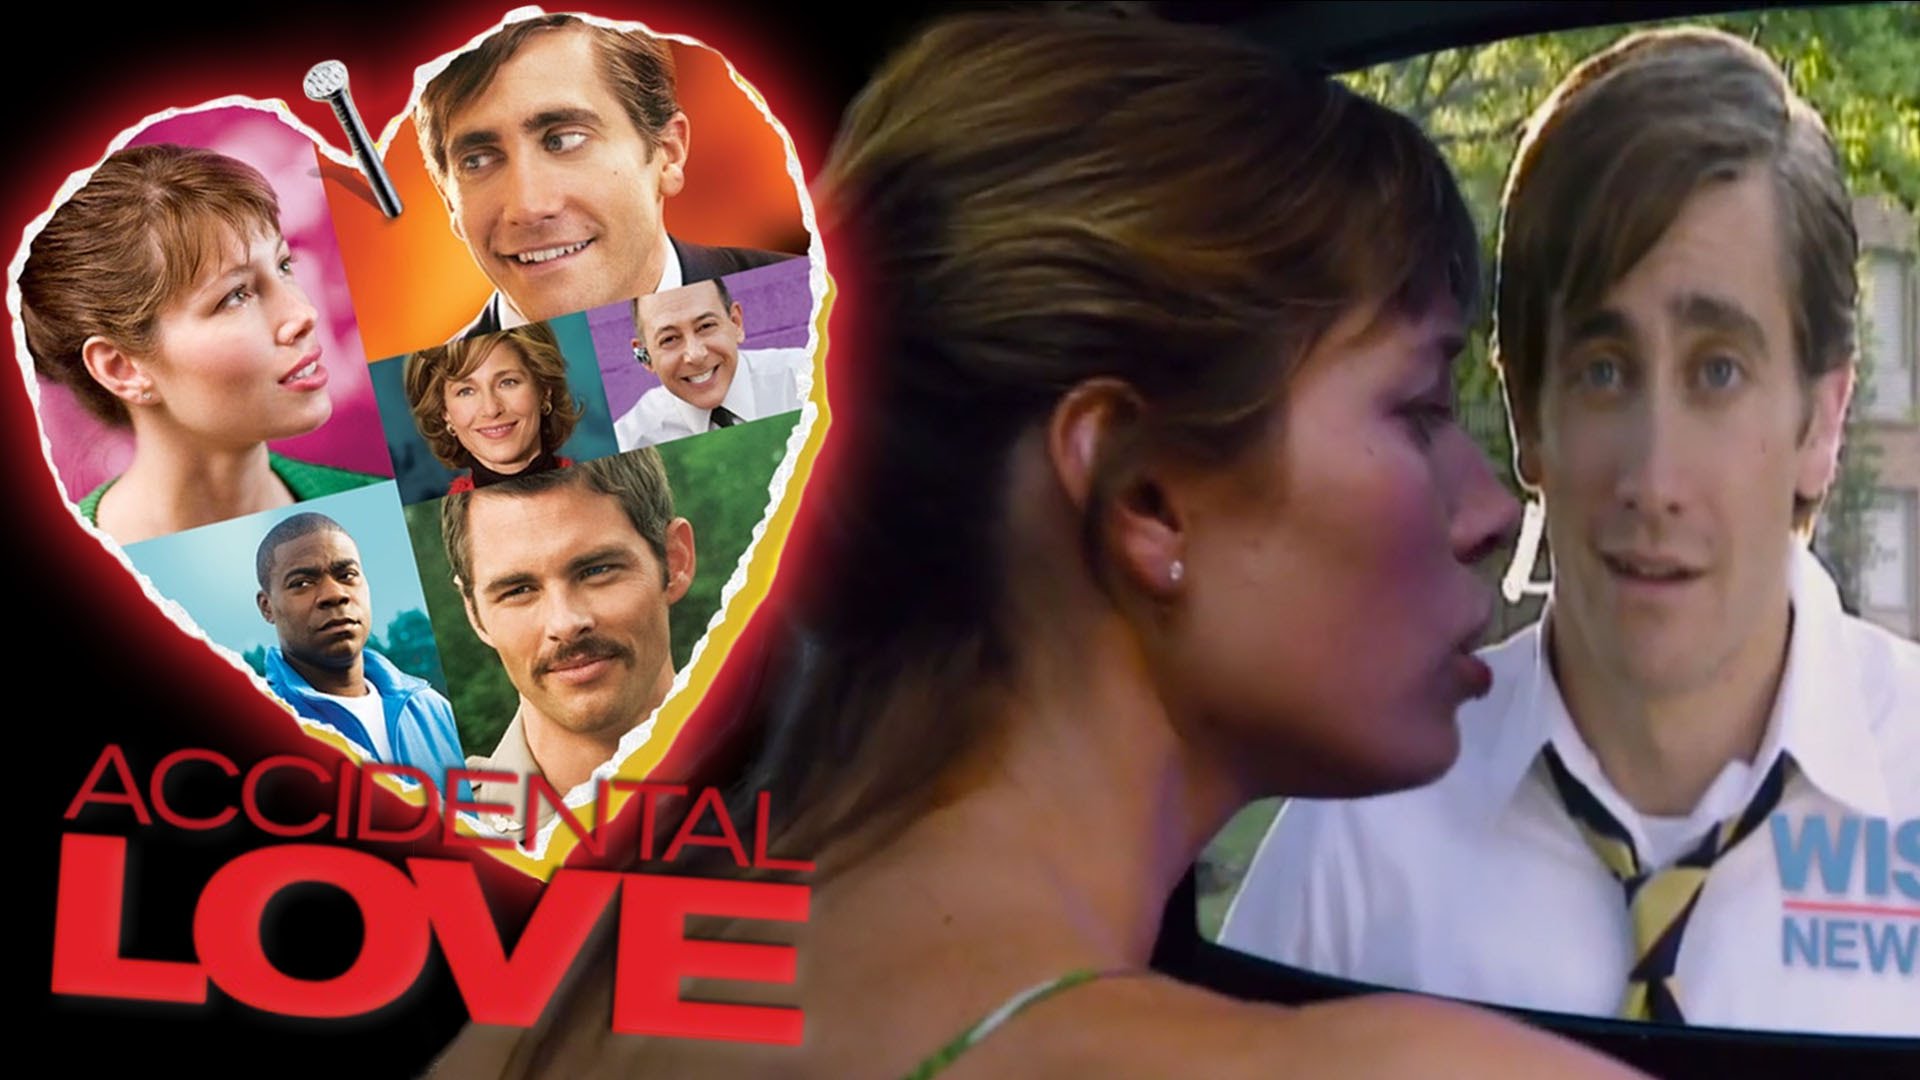 Movie Accidental Love HD Wallpaper | Background Image